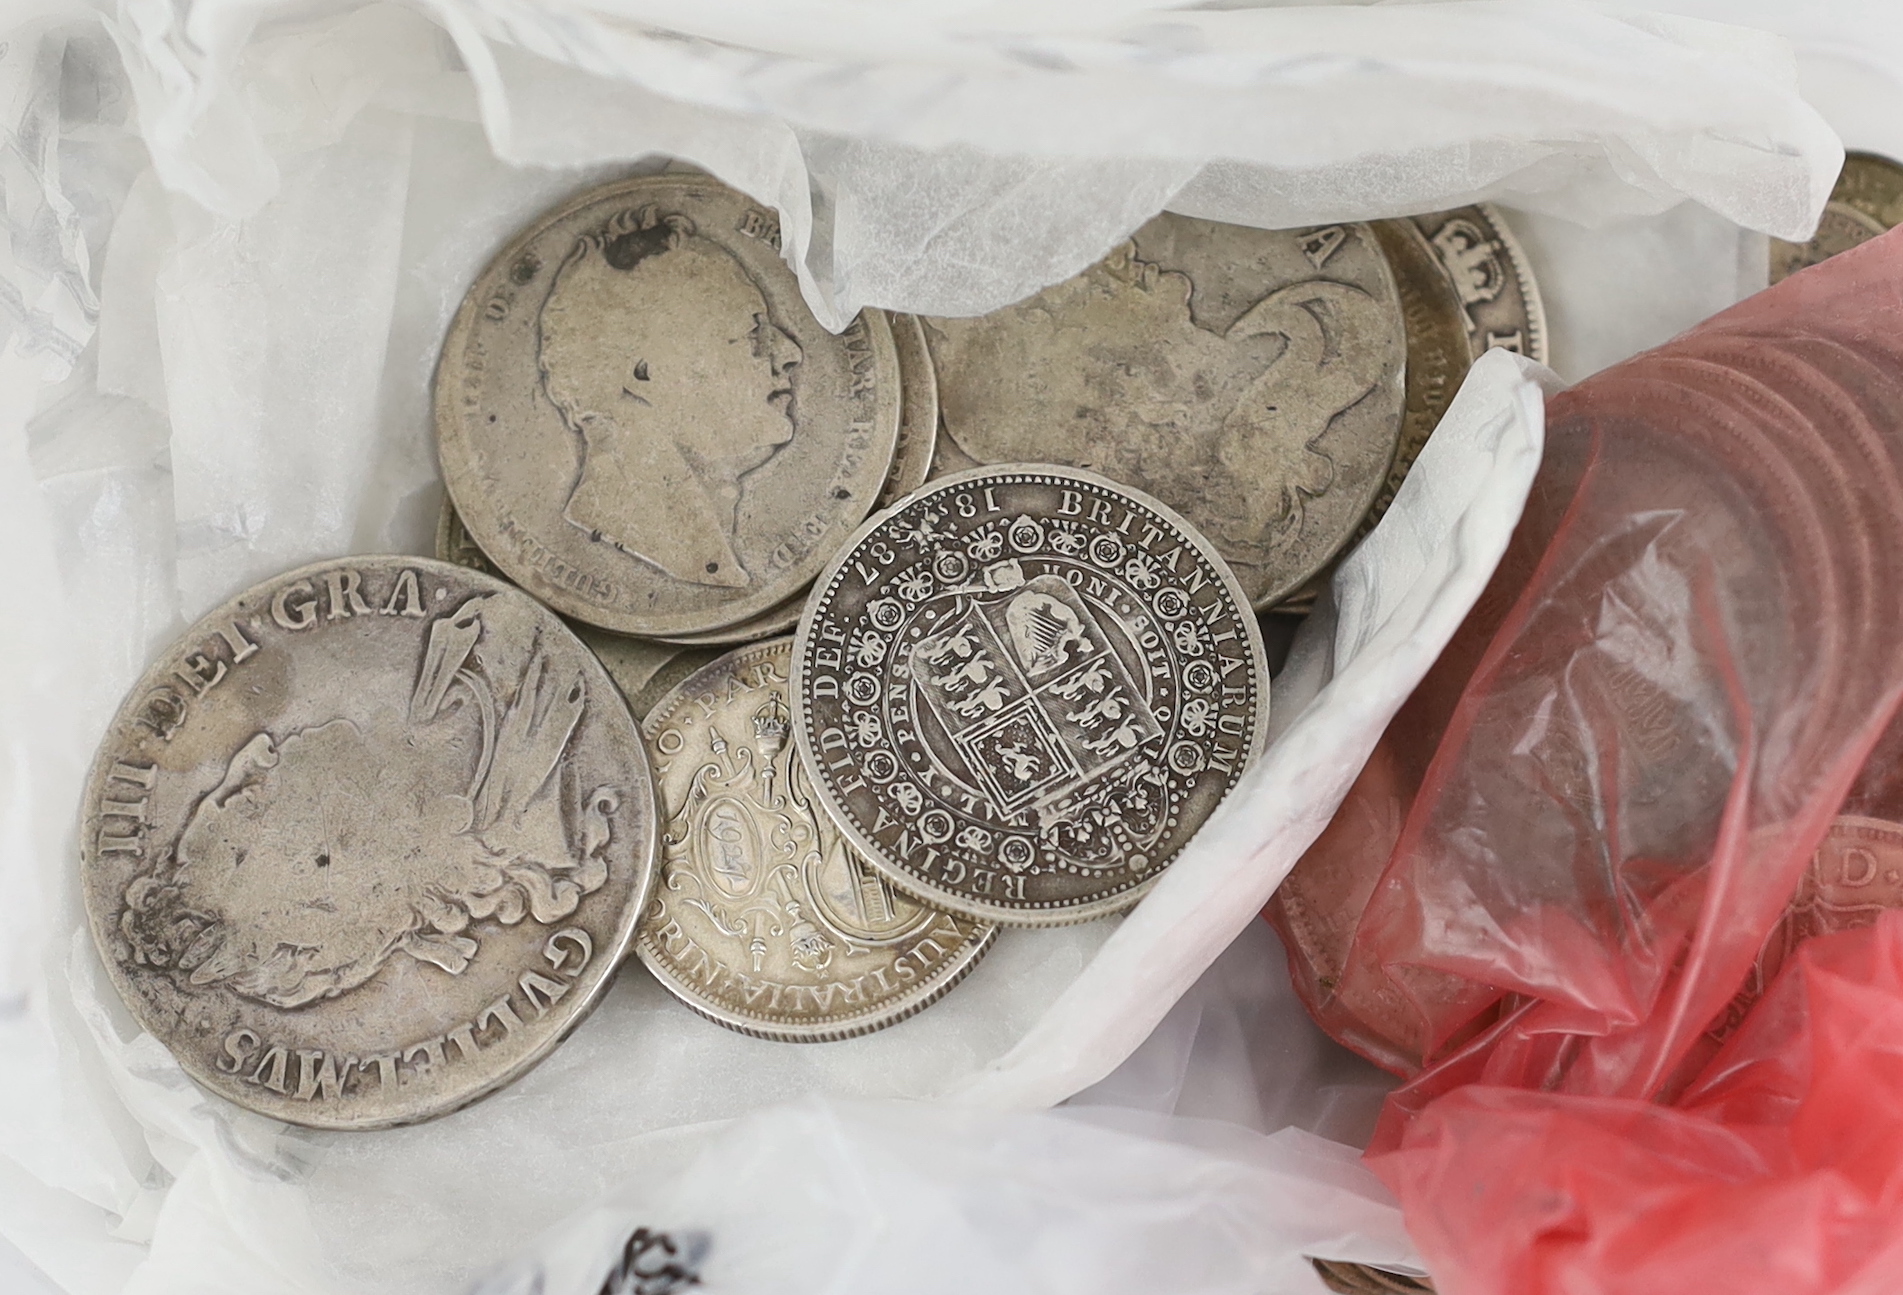 British and World coins, mostly silver including - 1670, 1695 and 1888 crowns, William IV to